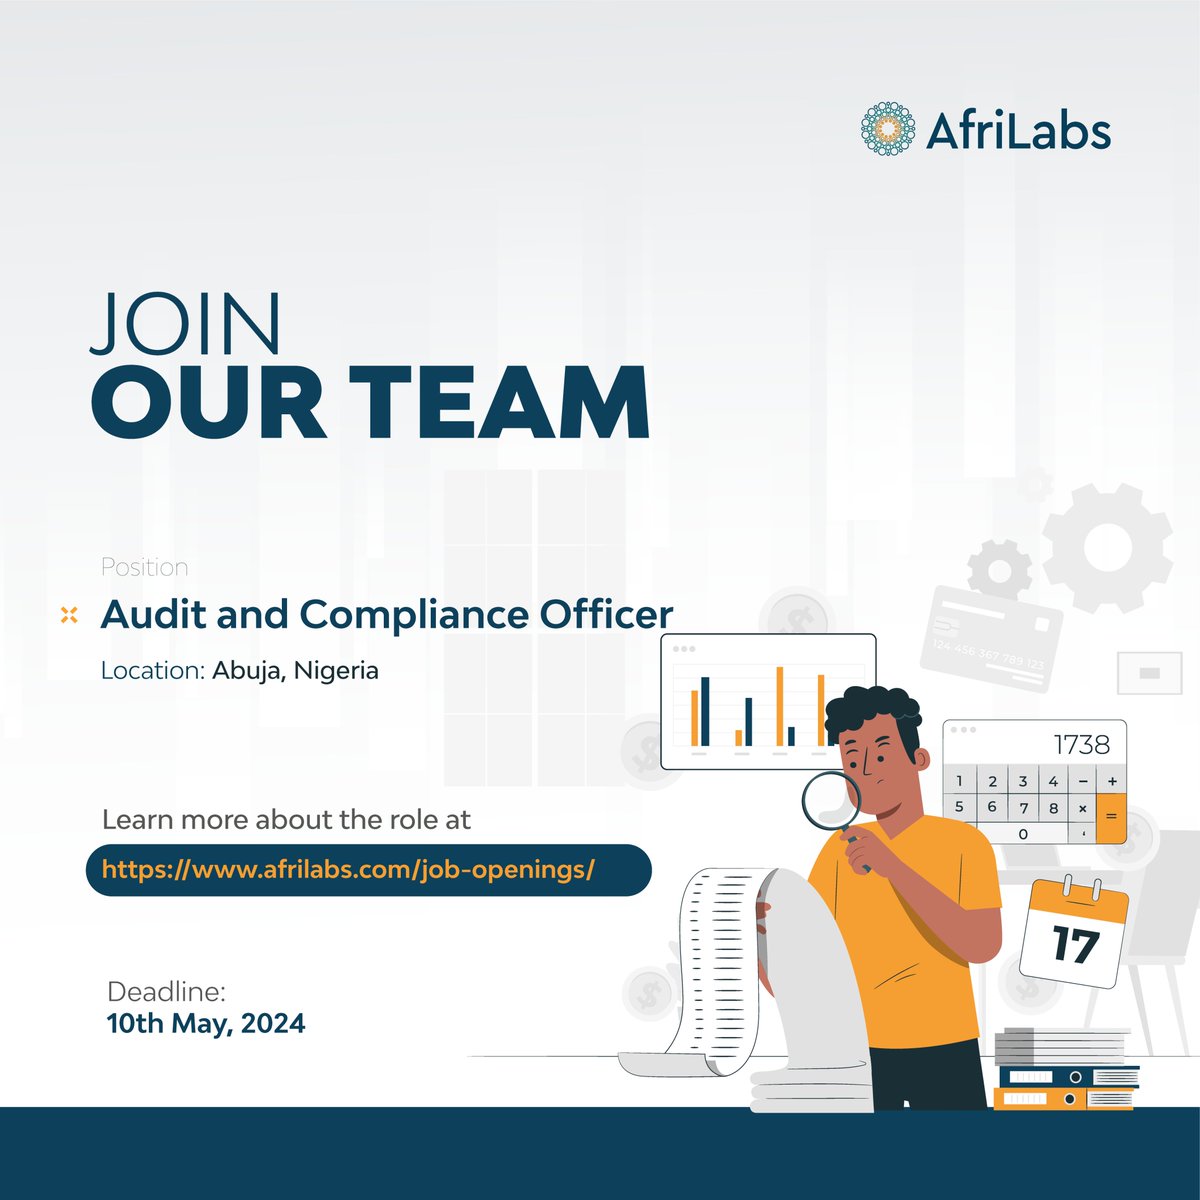 ❗ You have until Friday to apply! We're searching for a dedicated individual to join our team as an Audit and Compliance Officer. In this role, you'll support the Internal Audit and Compliance team in achieving its goals by implementing a systematic, disciplined approach to…